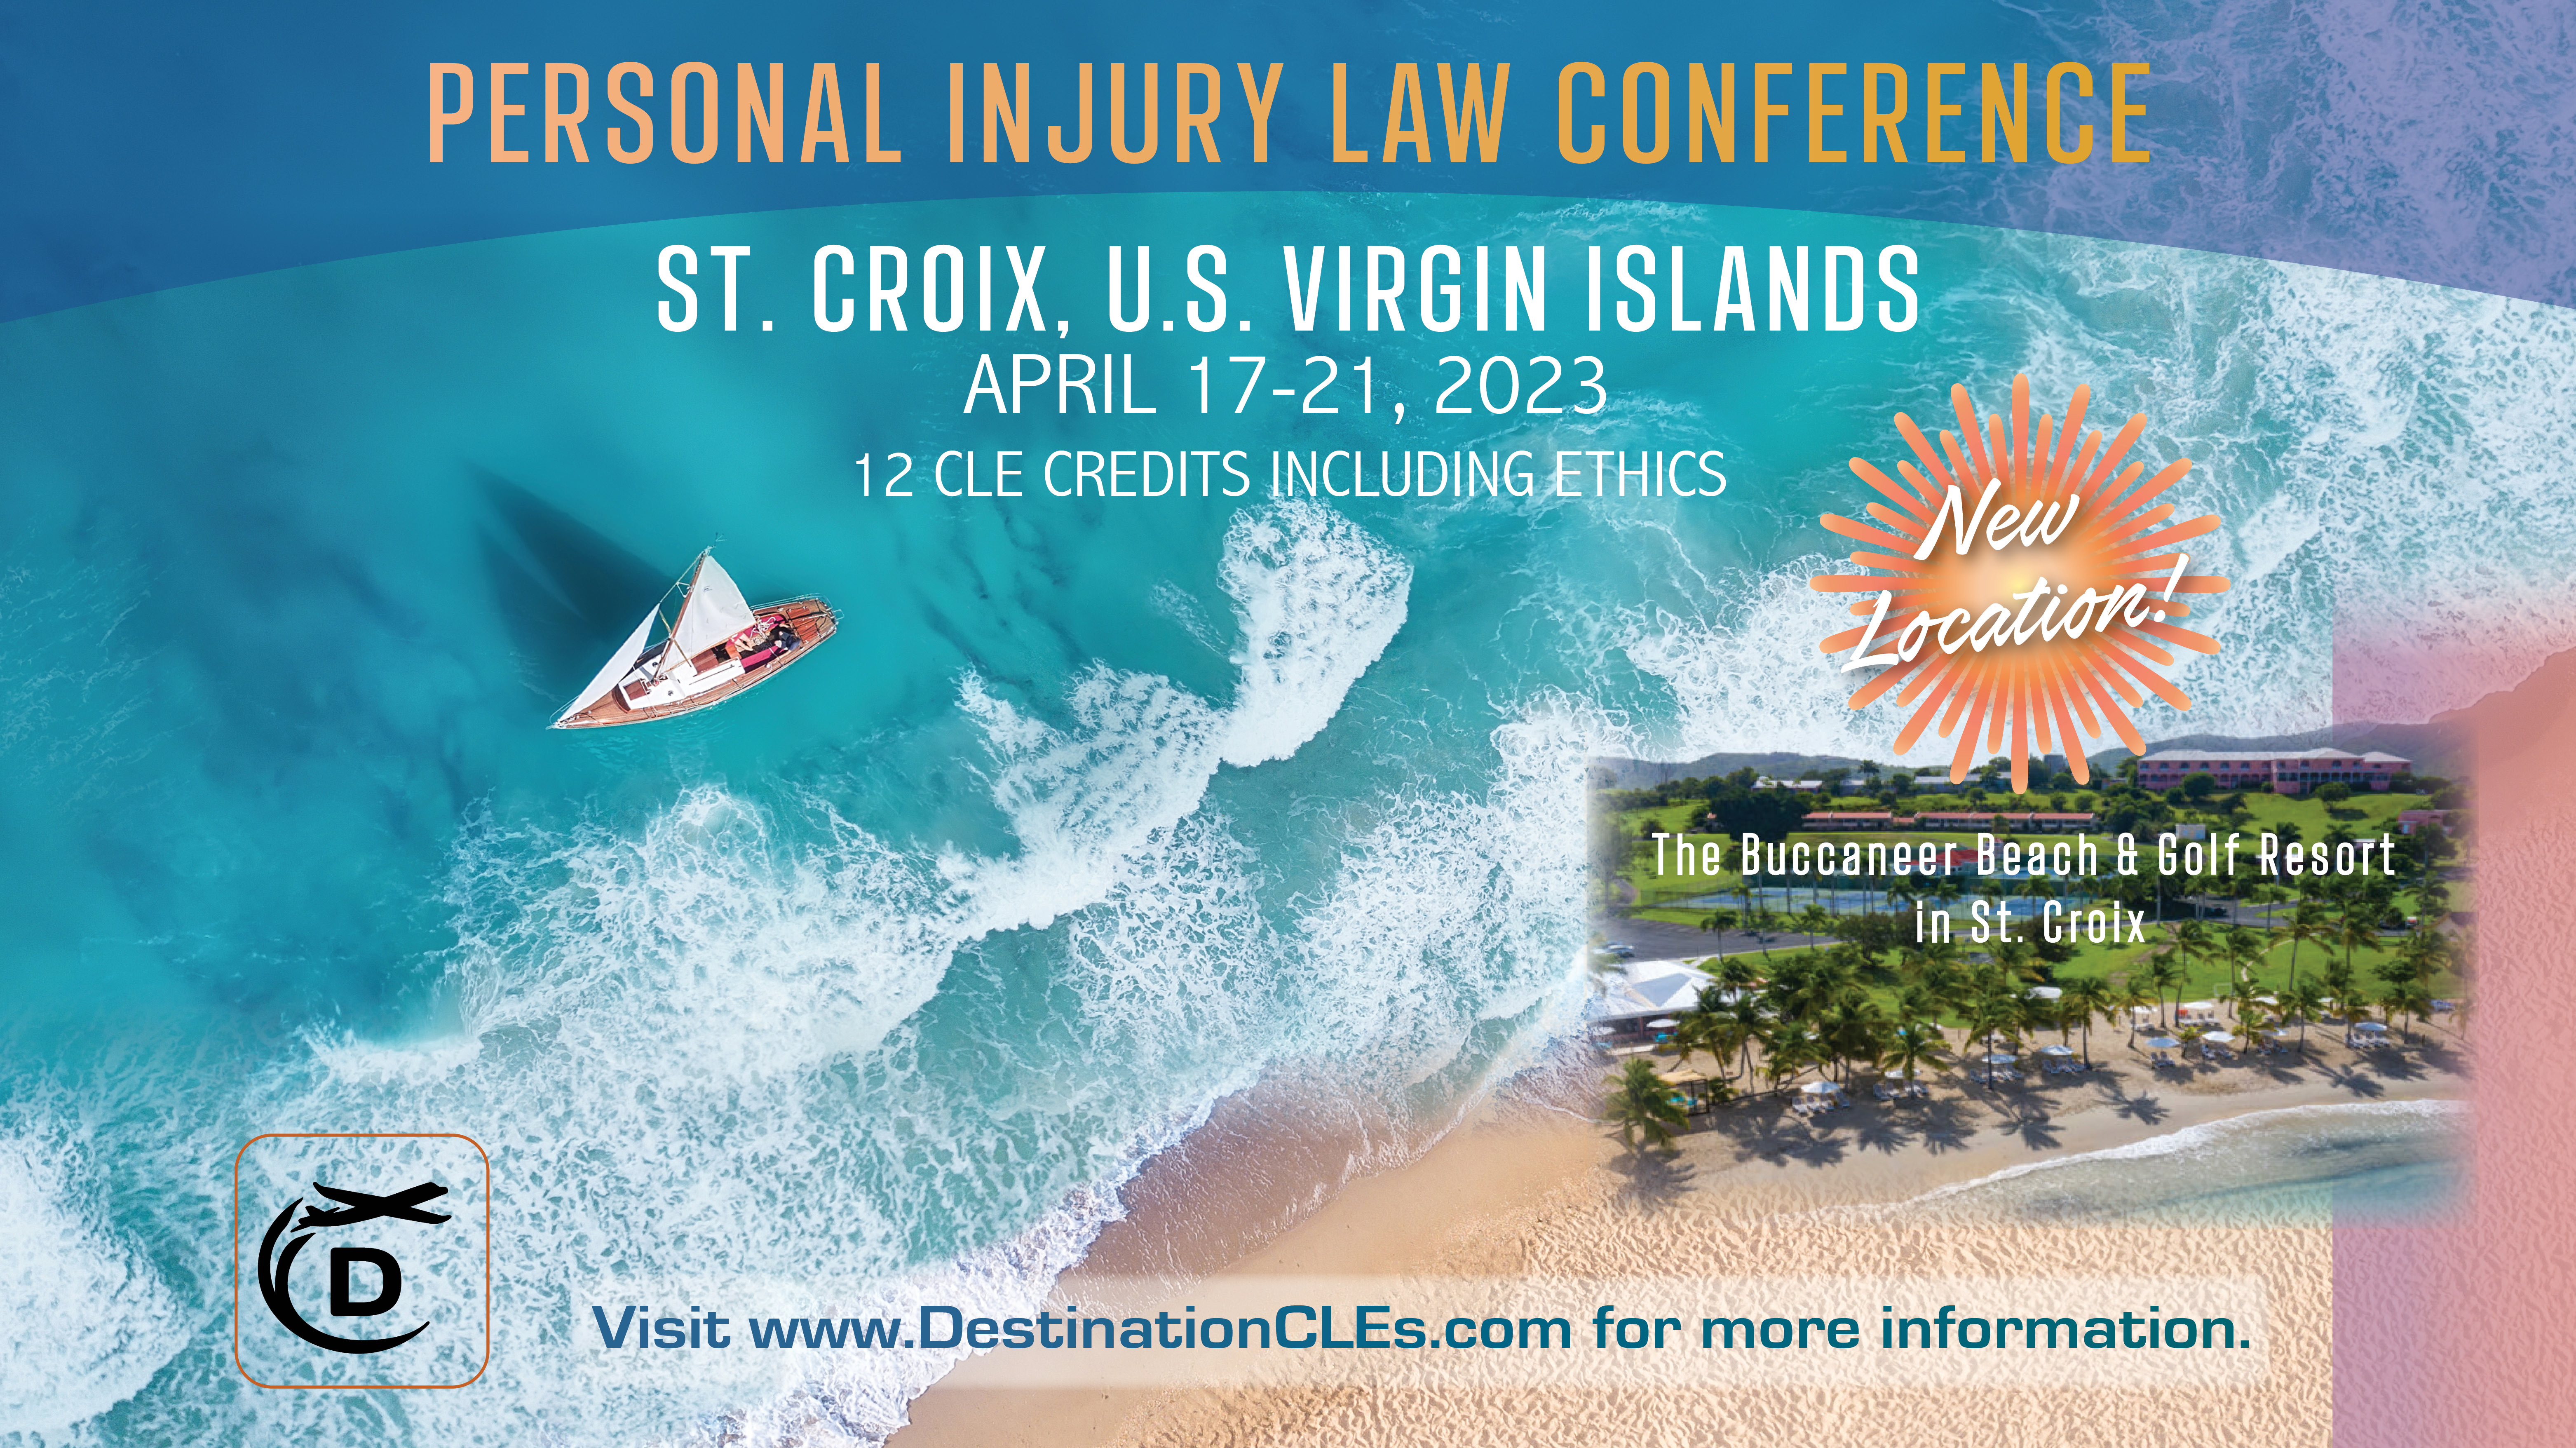 Traumatic Brain Injury Litigation: Online CLE Course